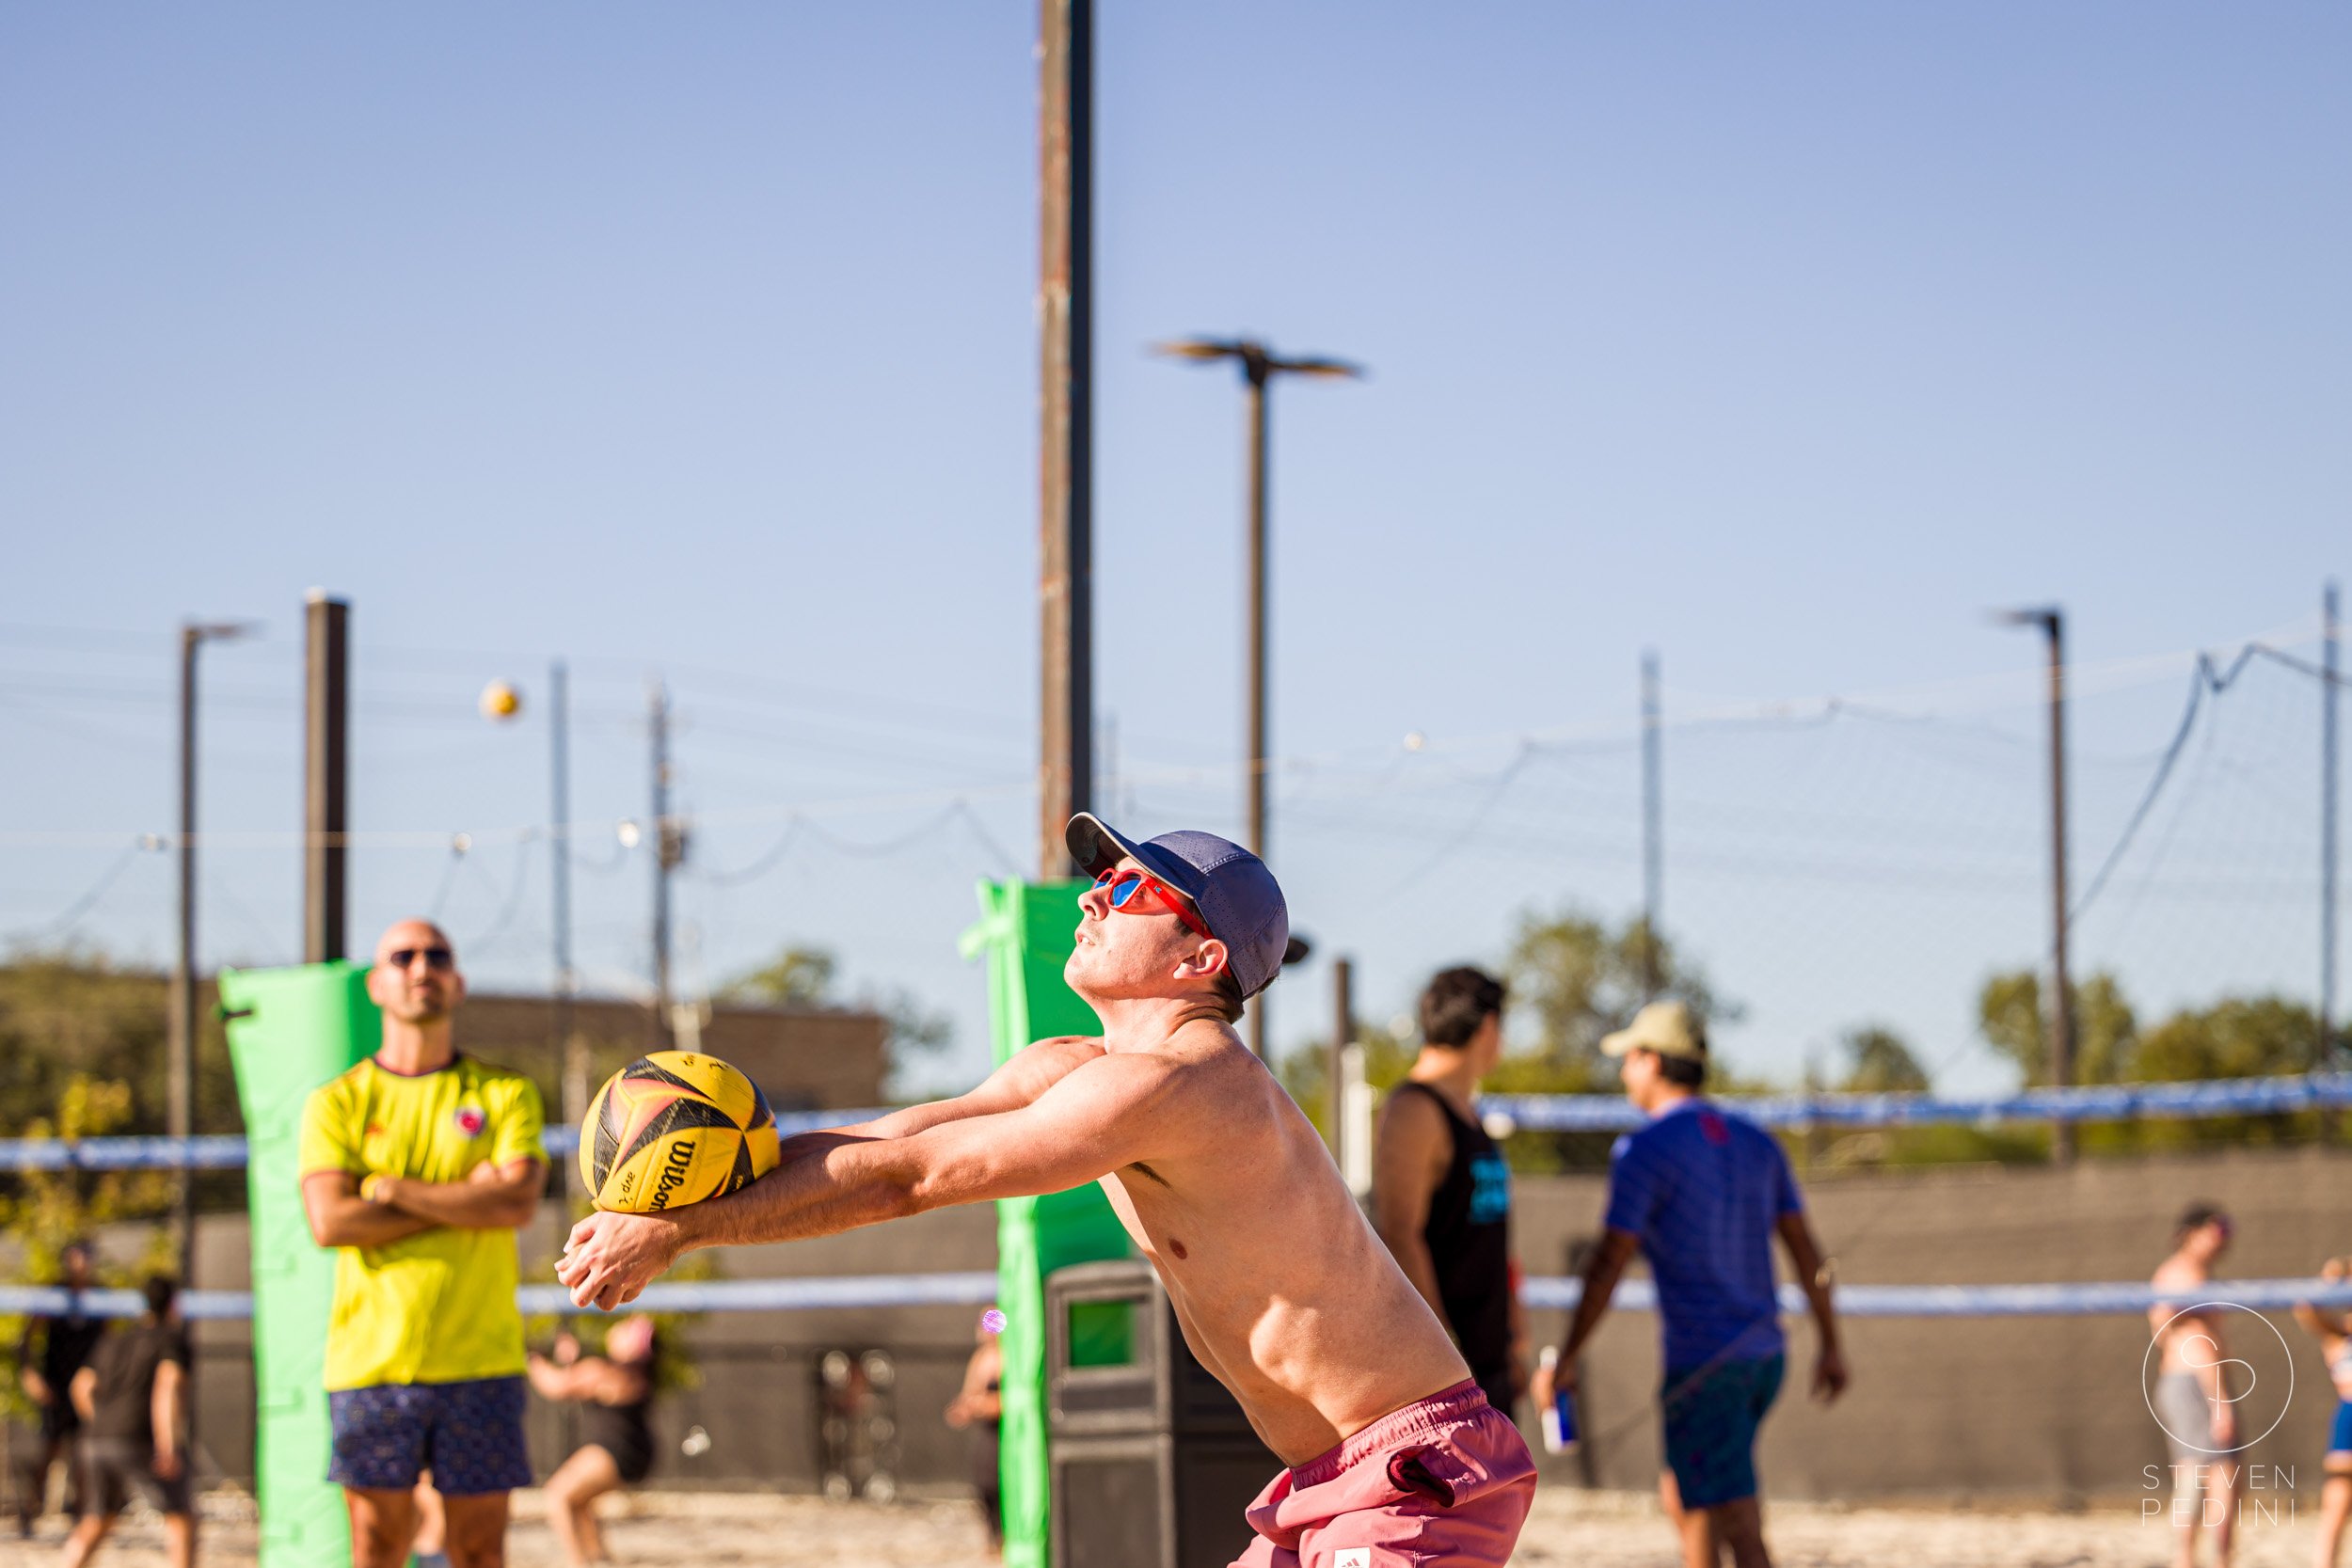 Steven Pedini Photography - Bumpy Pickle - Sand Volleyball - Houston TX - World Cup of Volleyball - 00043.jpg